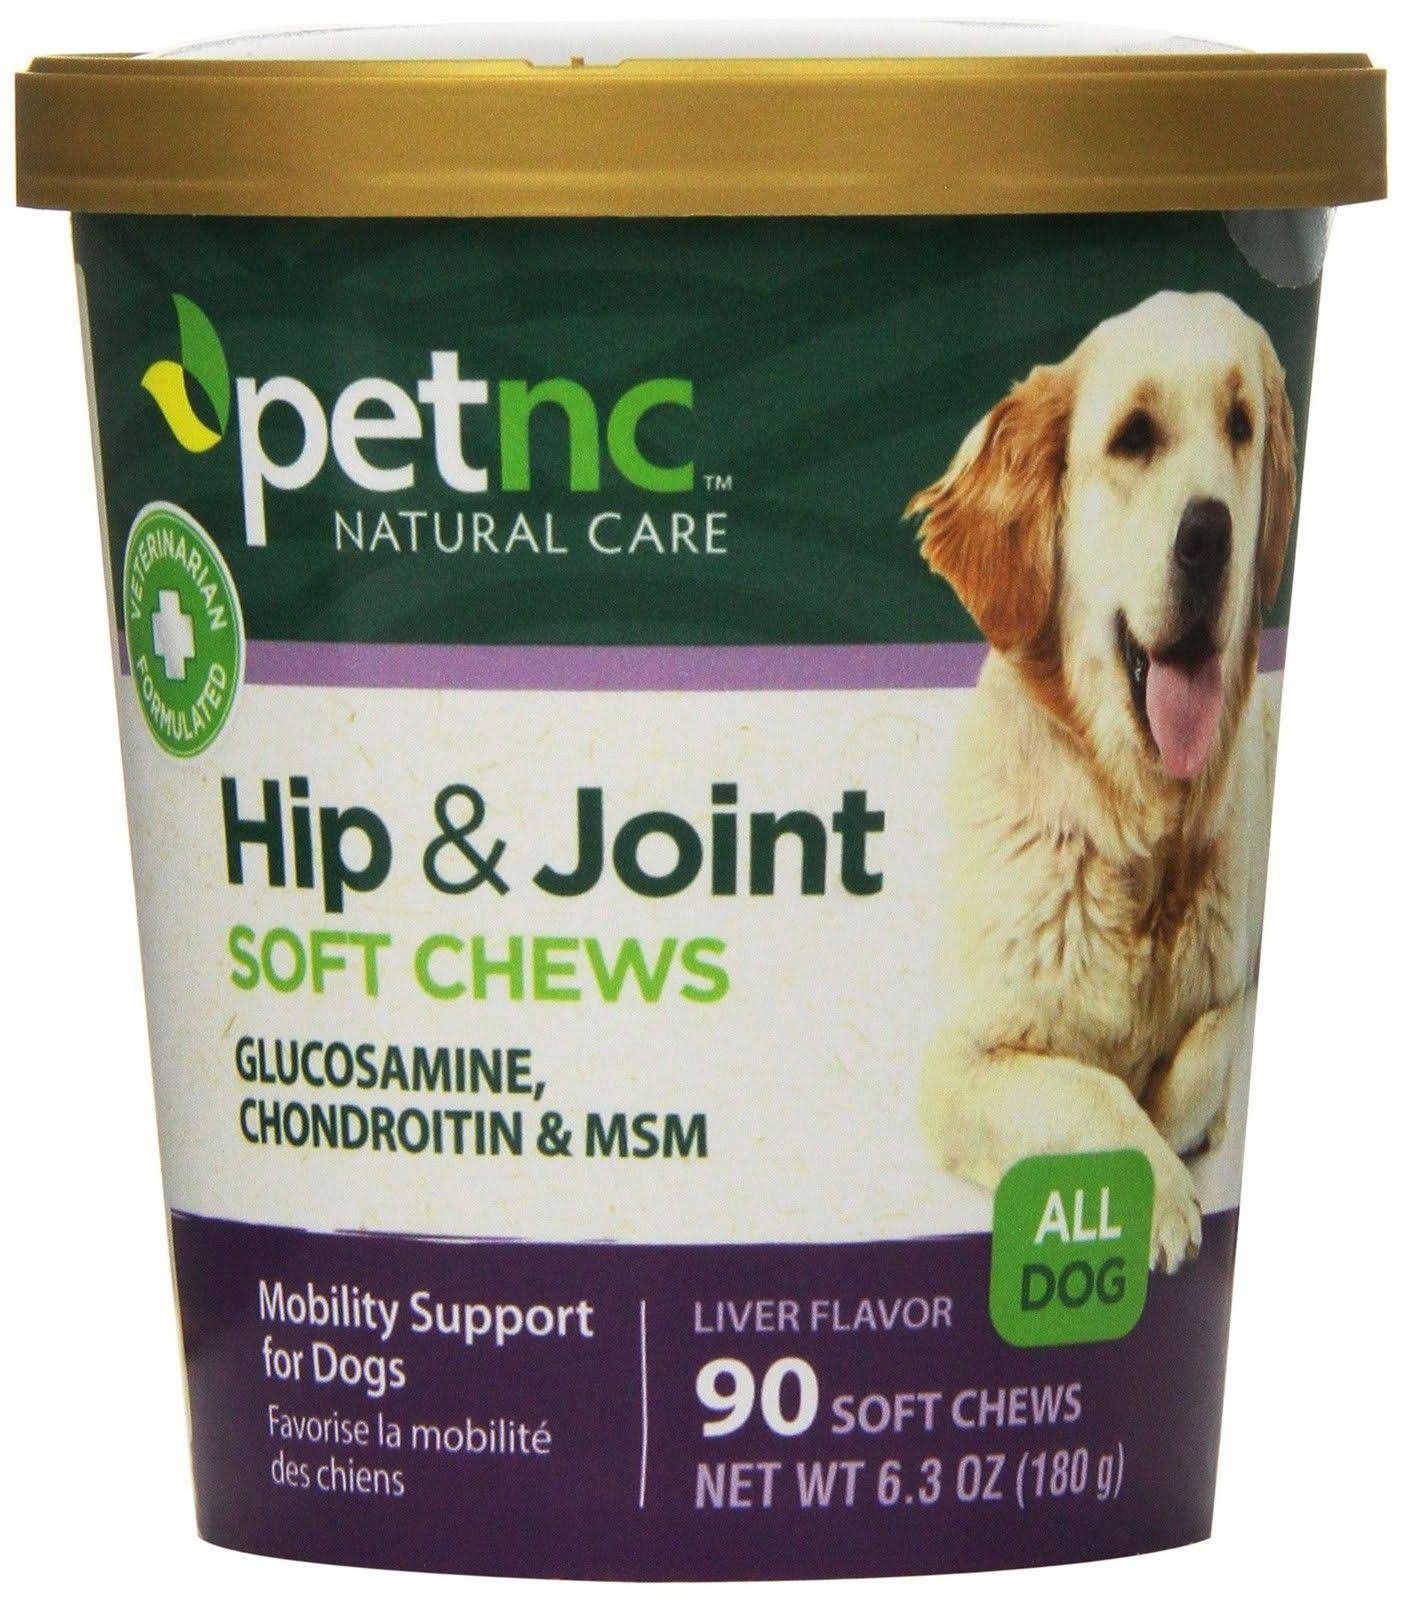 PetNC Natural Care Hip and Joint Dog Chews - 90 Soft Chews